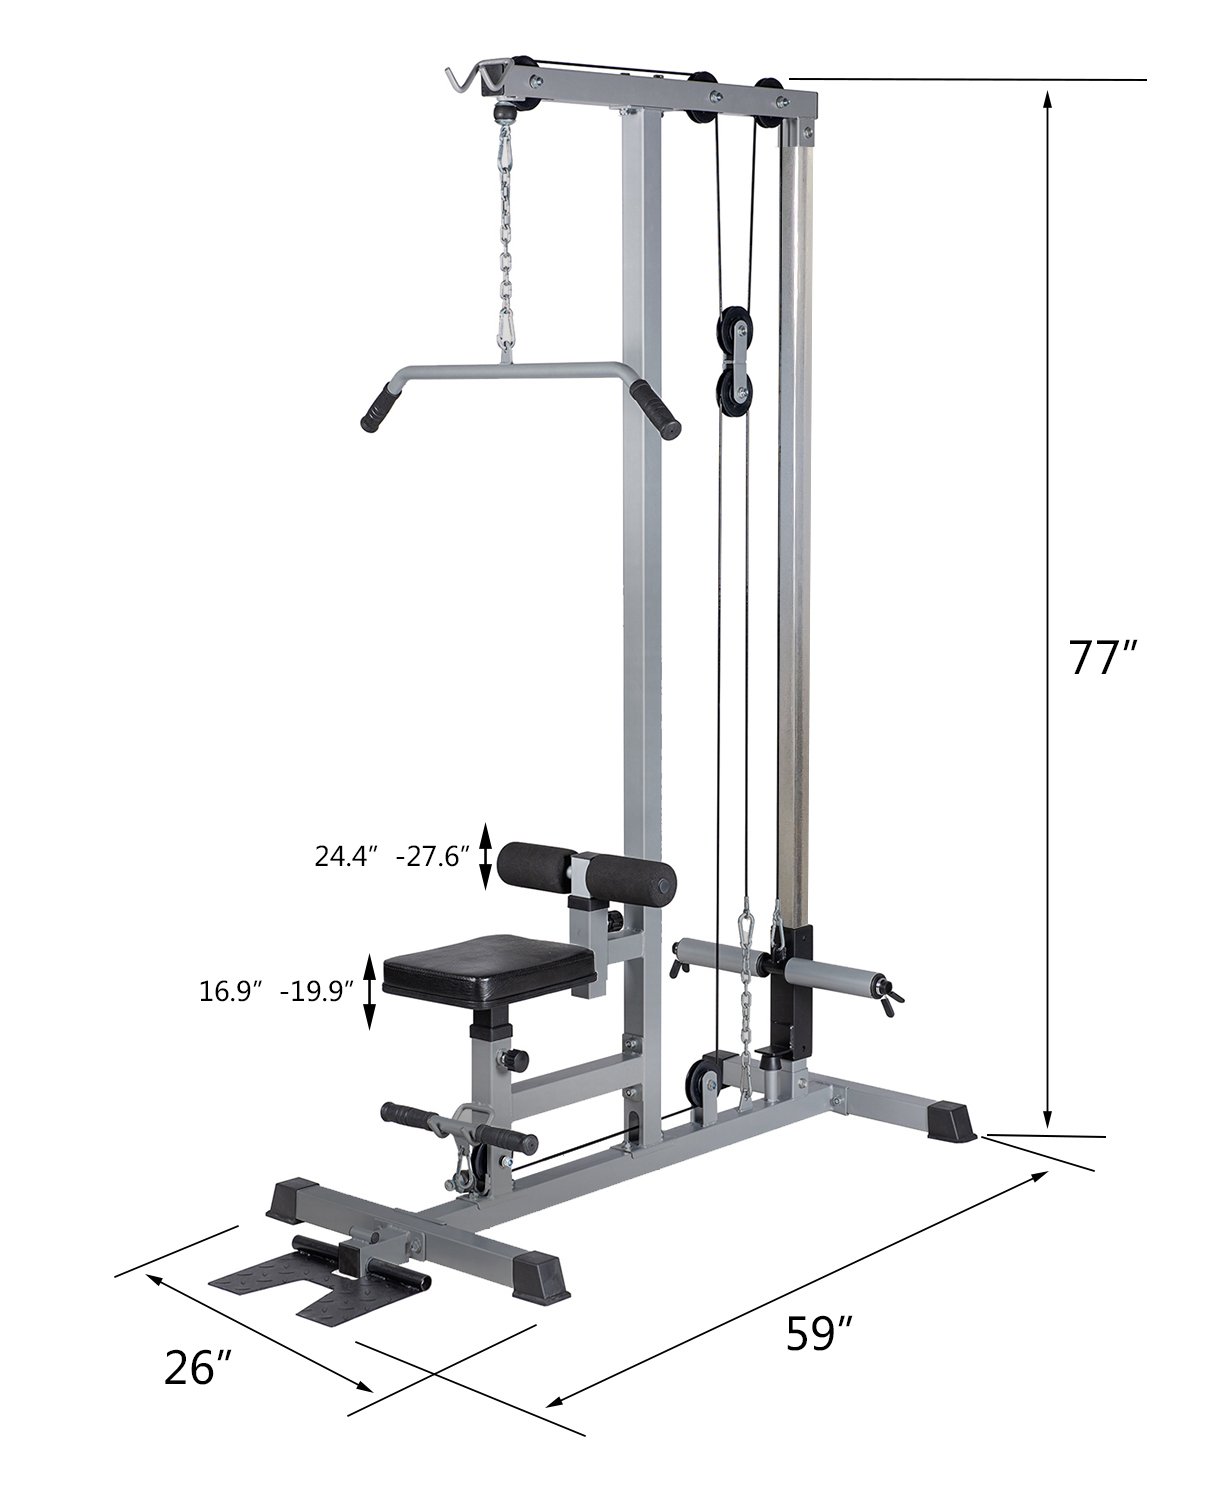 Lat Pull Down Machine Multifunction Low Row Bar Cable Fitness Body Workout Gym - image 2 of 6